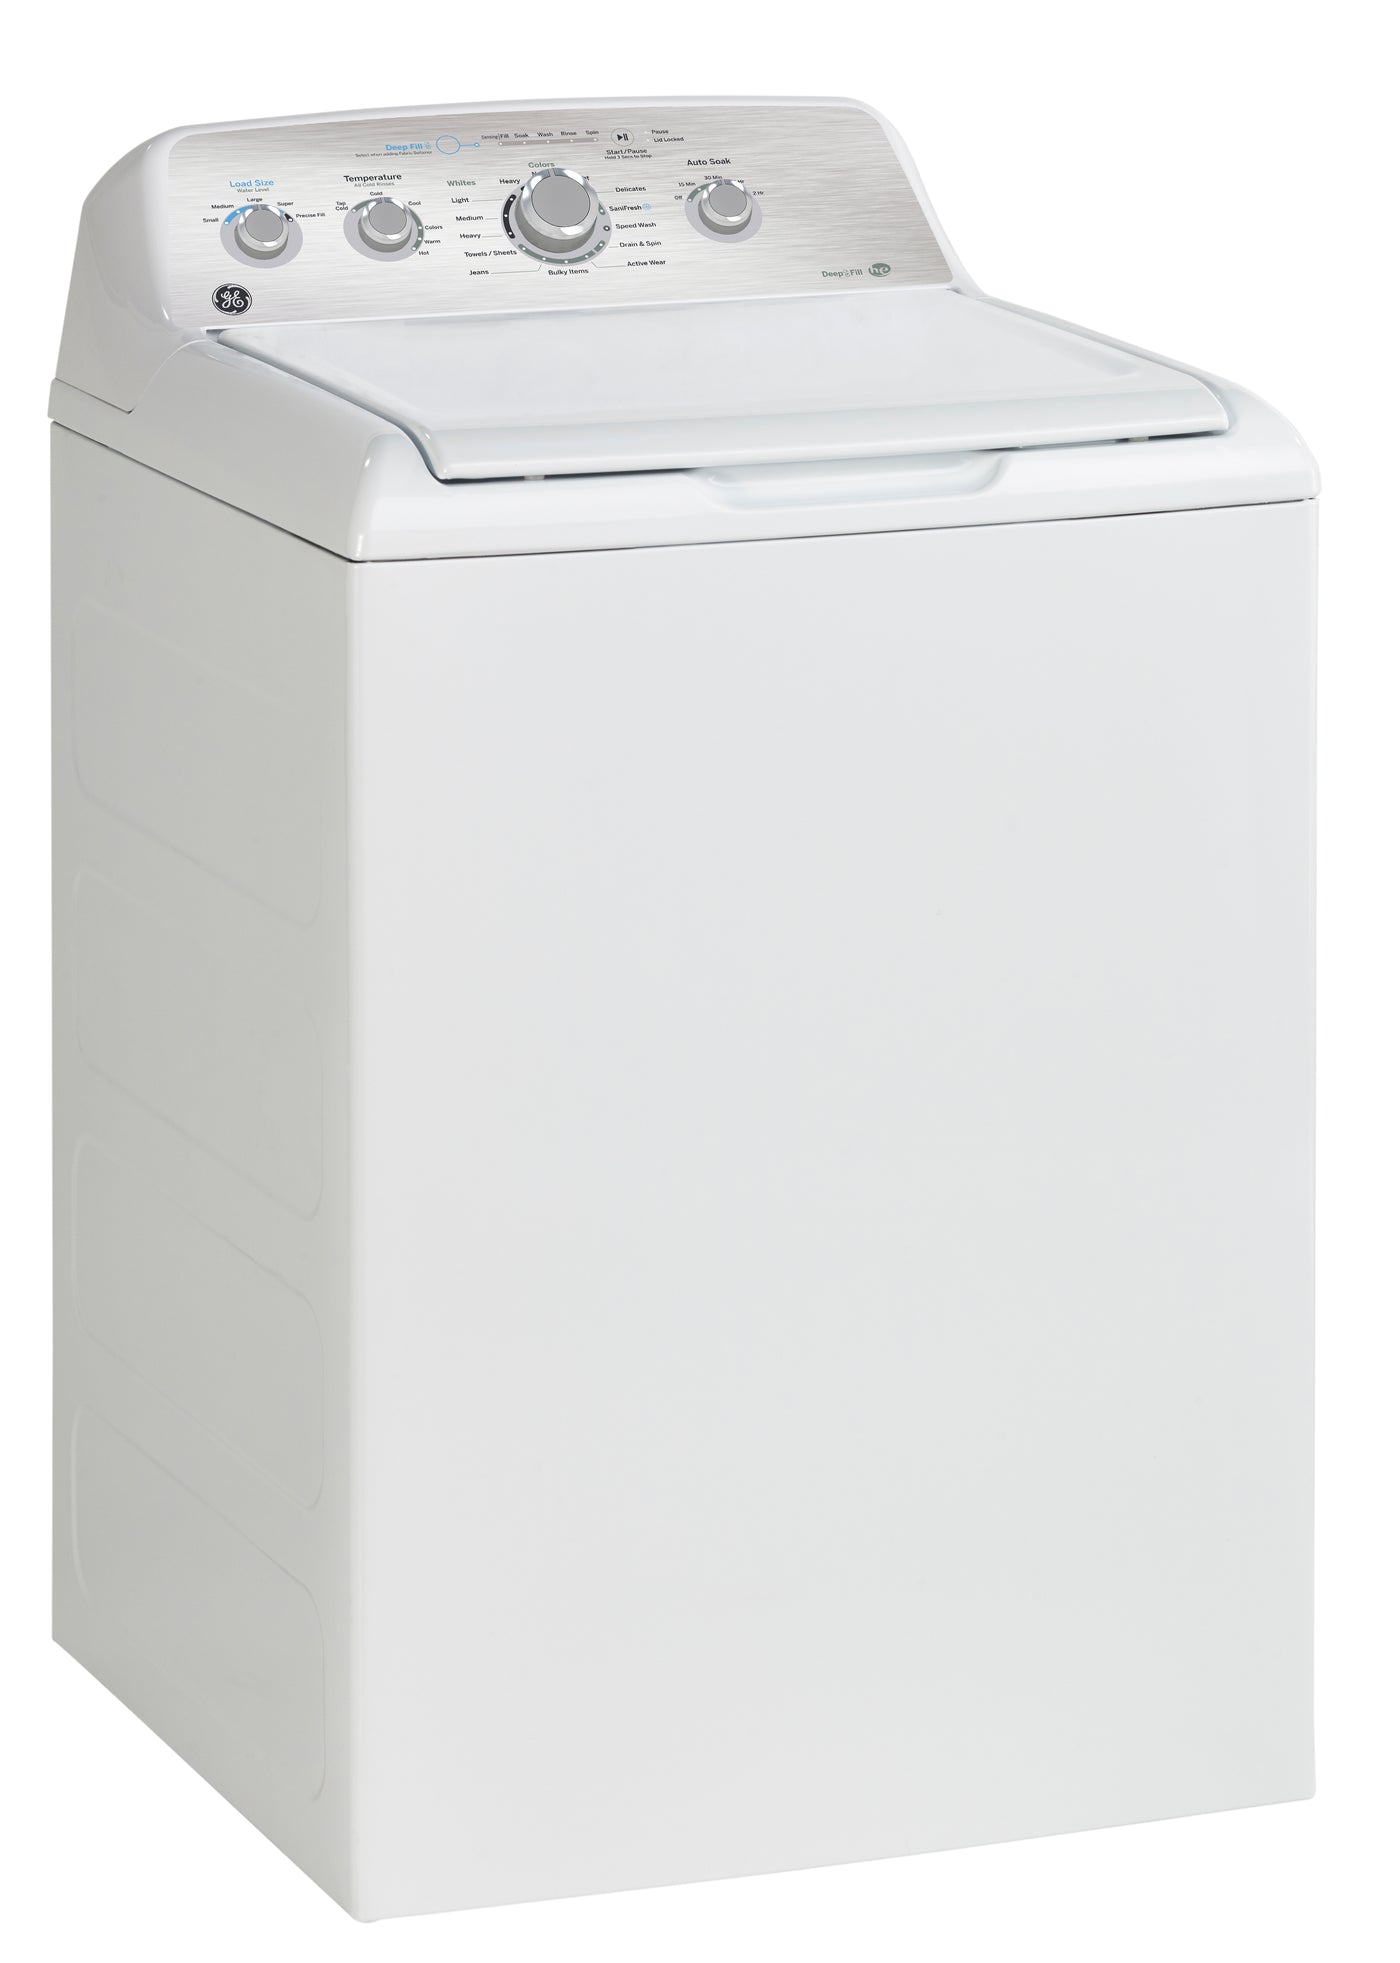 GE White Top-Load Washer (4.9 Cu. Ft.) - GTW451BMRWS